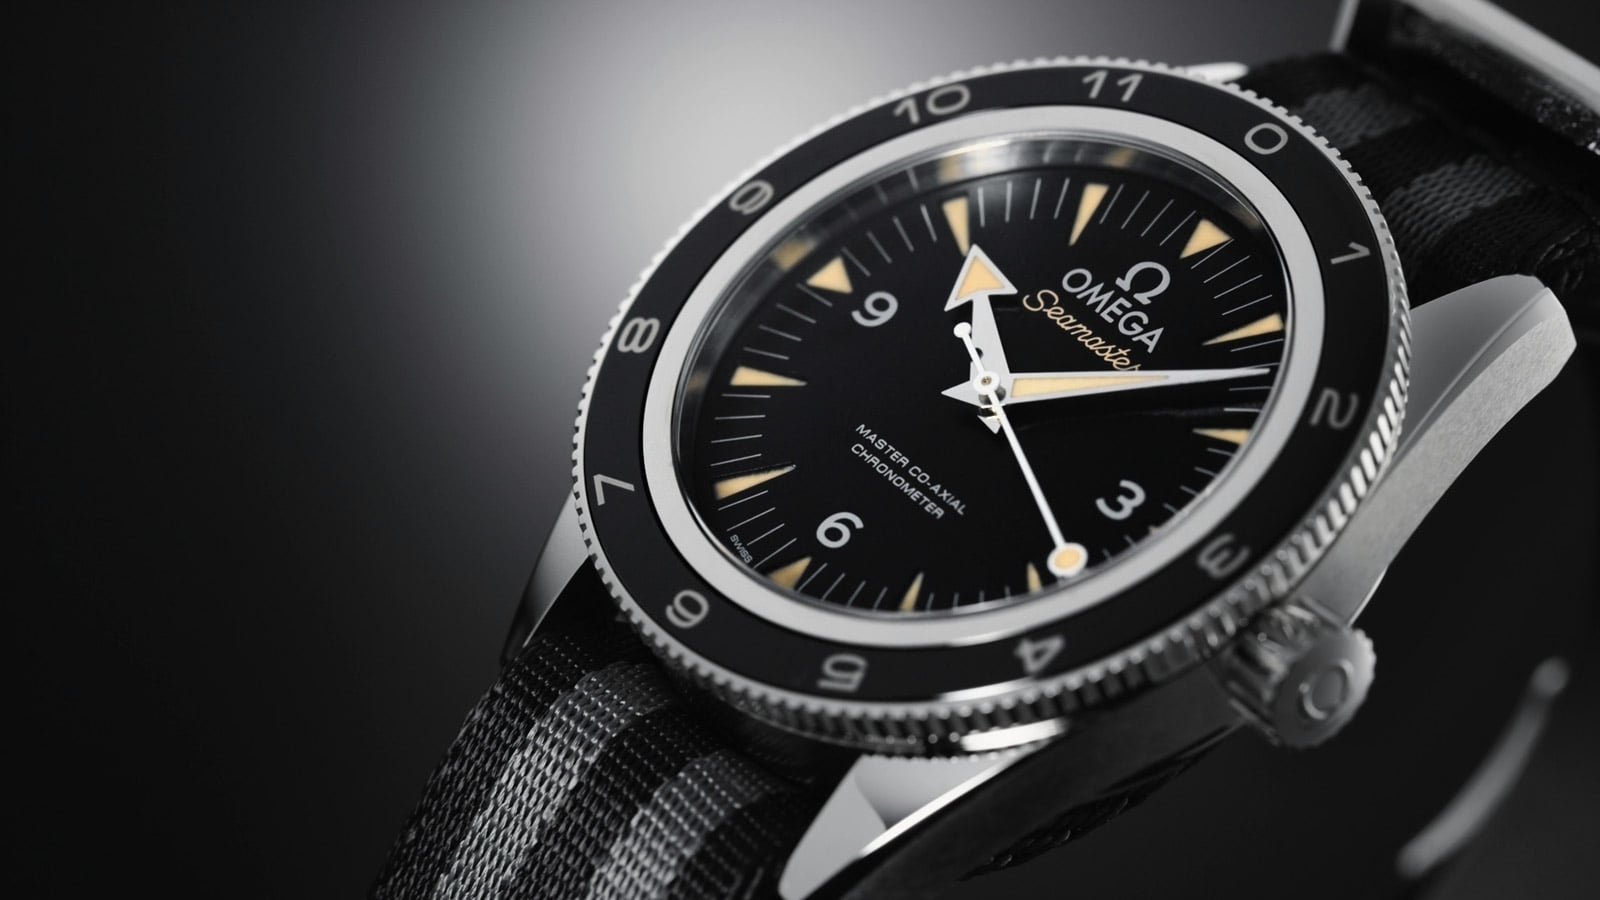 Omega Seamaster Diver 300M Co-Axial